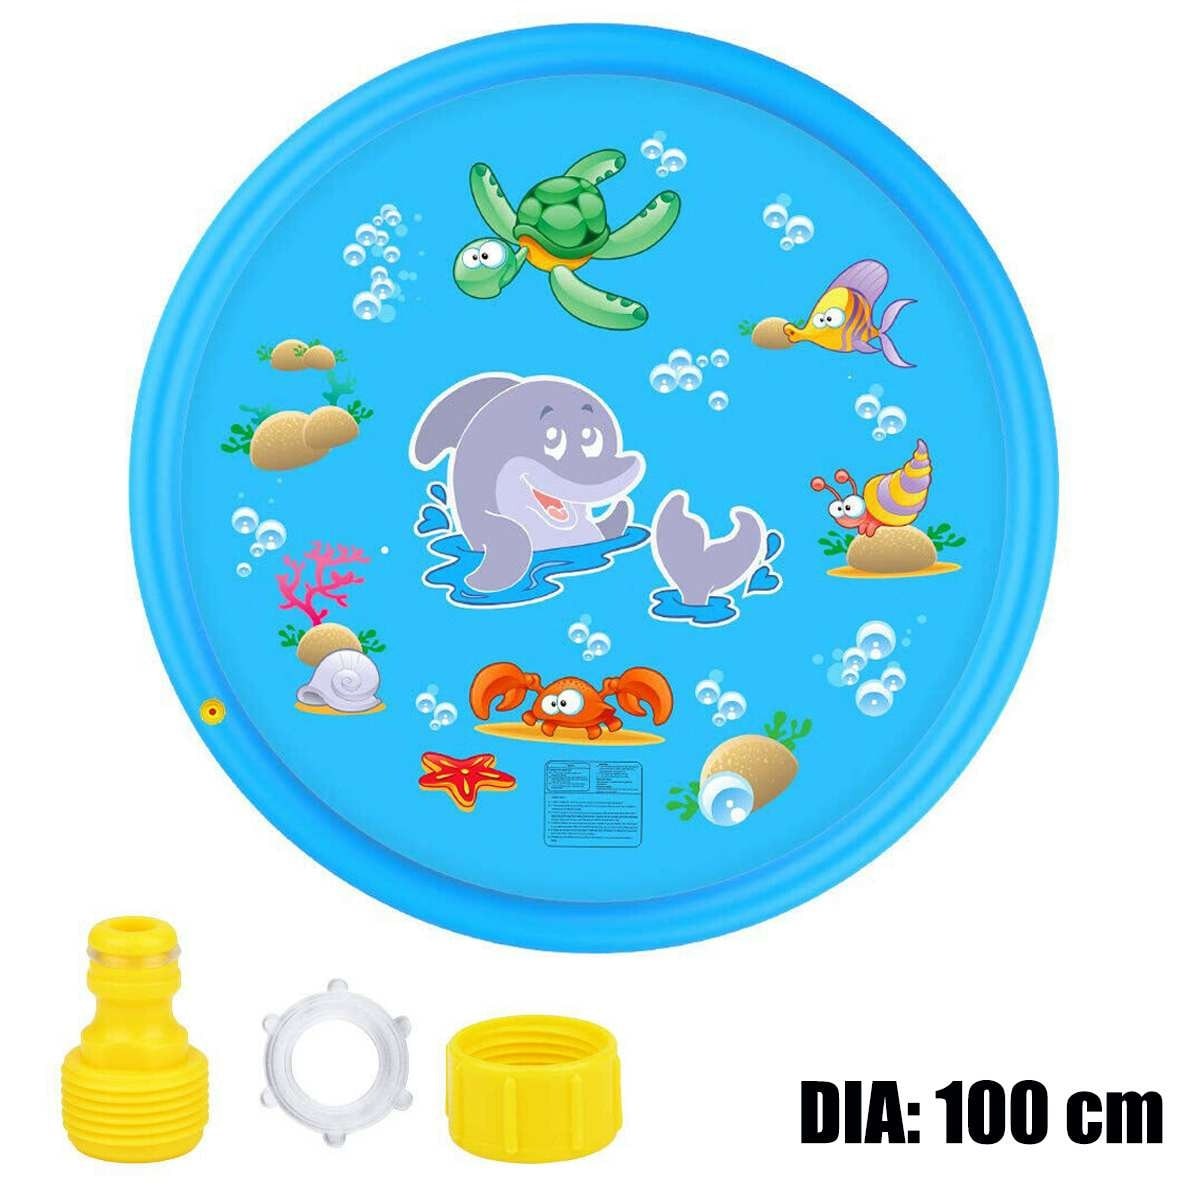 100/170cmx Children Outdoor Funny Toys Kids Inflatable Round Water Splash Play Pools Playing Sprinkler Mat Yard Water Sp Blue - 5